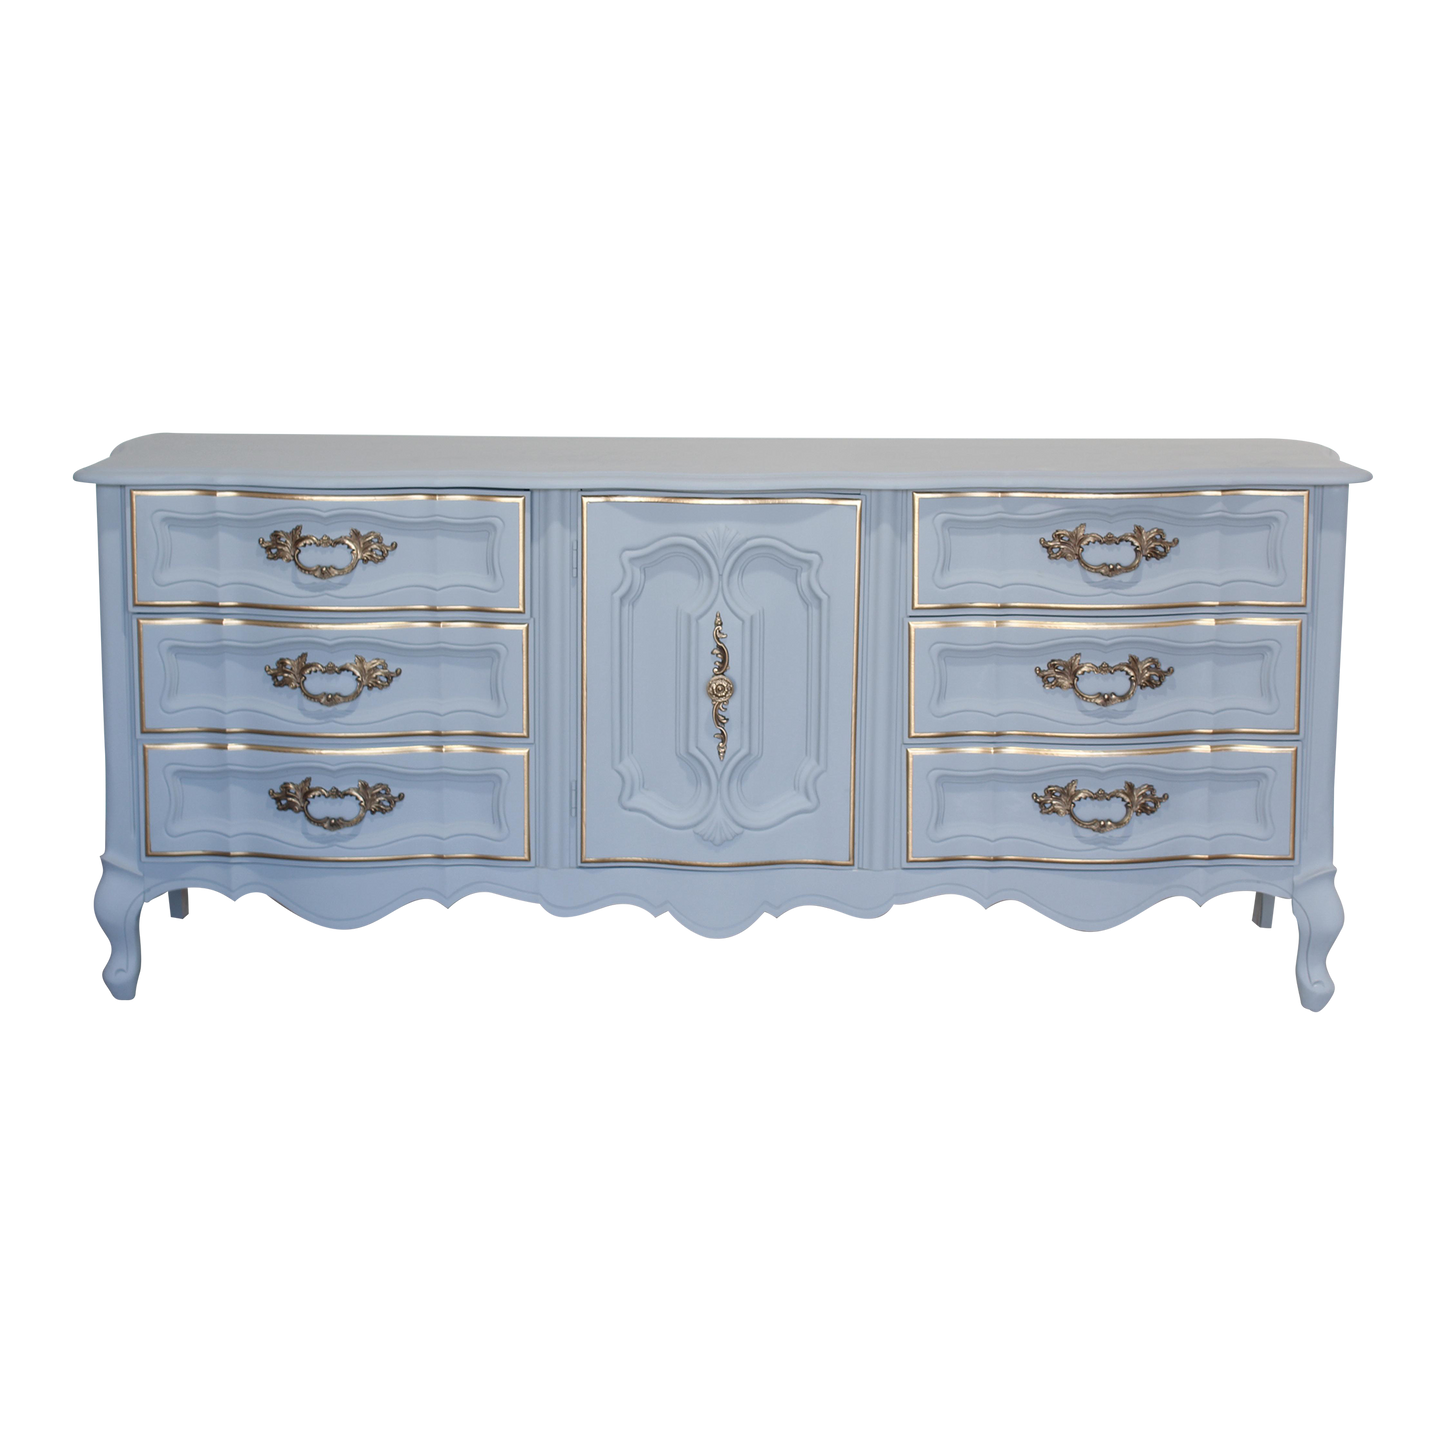 Vintage French provincial dresser of nine drawers.  This is a solid built dresser with dovetail joints, professionally refinished in gray with gold painted accents.  Dimensions; 72" Width x 19" Depth x 31" Height. 